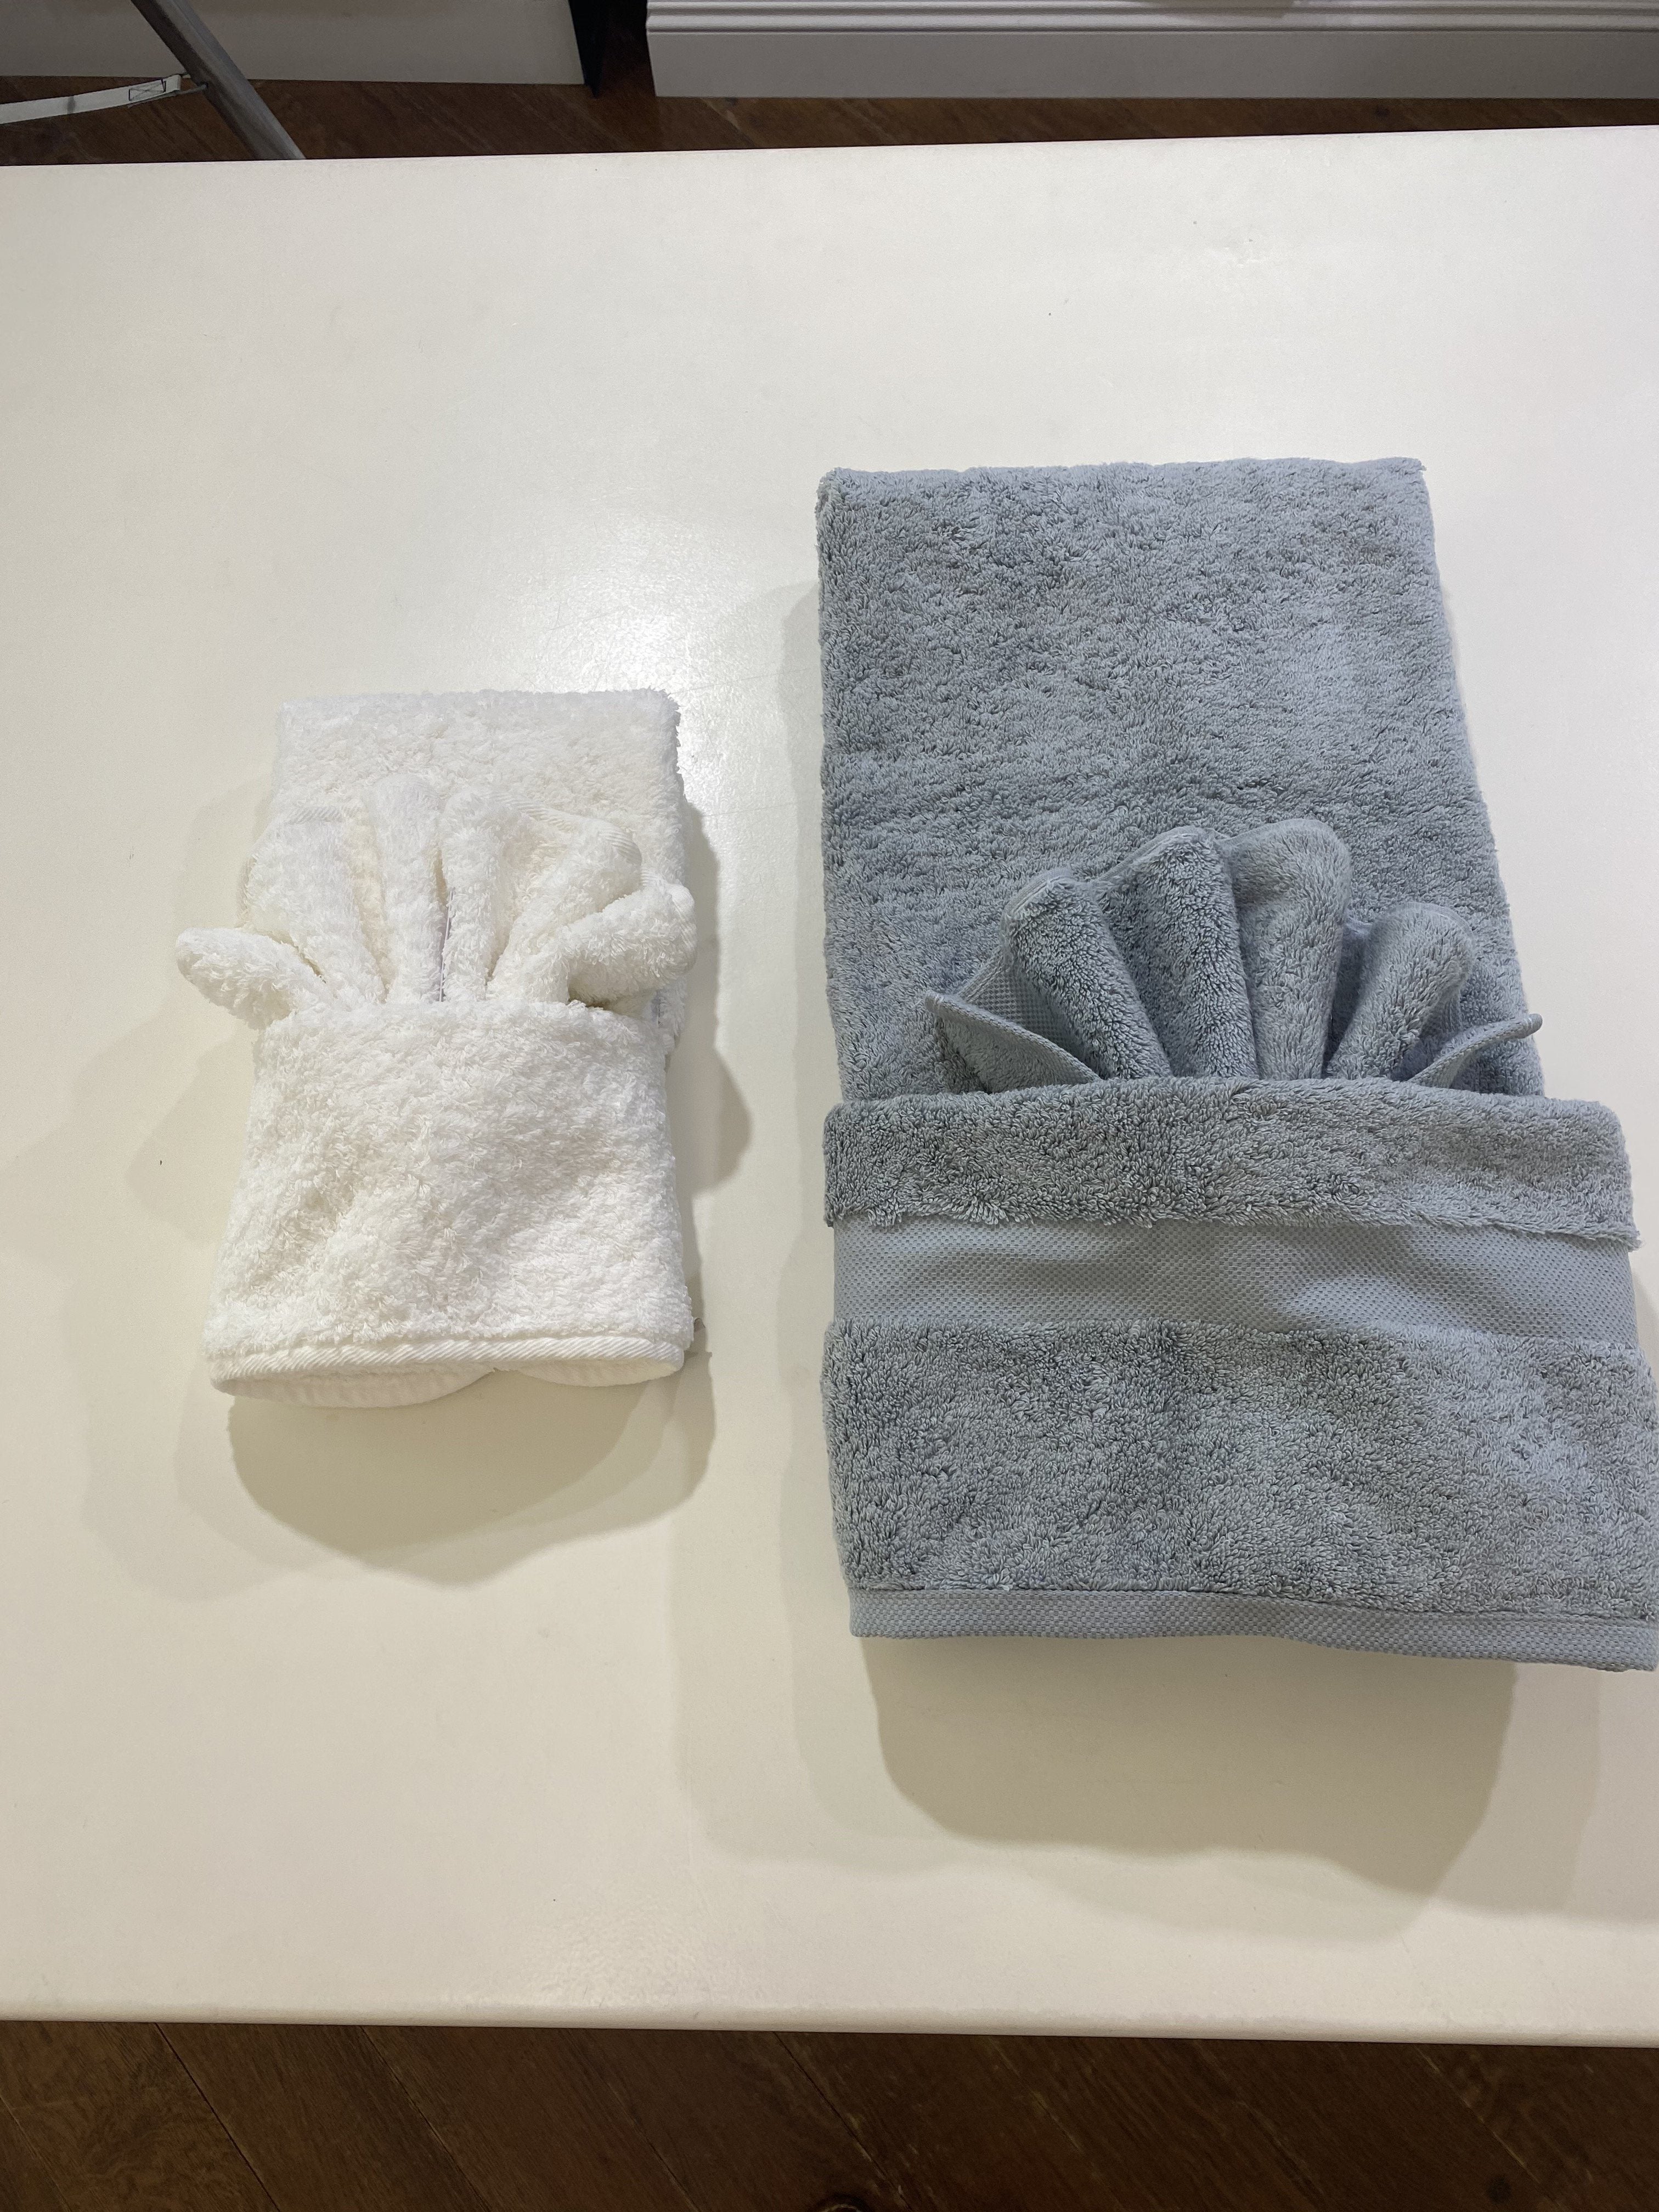 Let's roll: Towel Rolling and Folding 101 – Bedside Manor